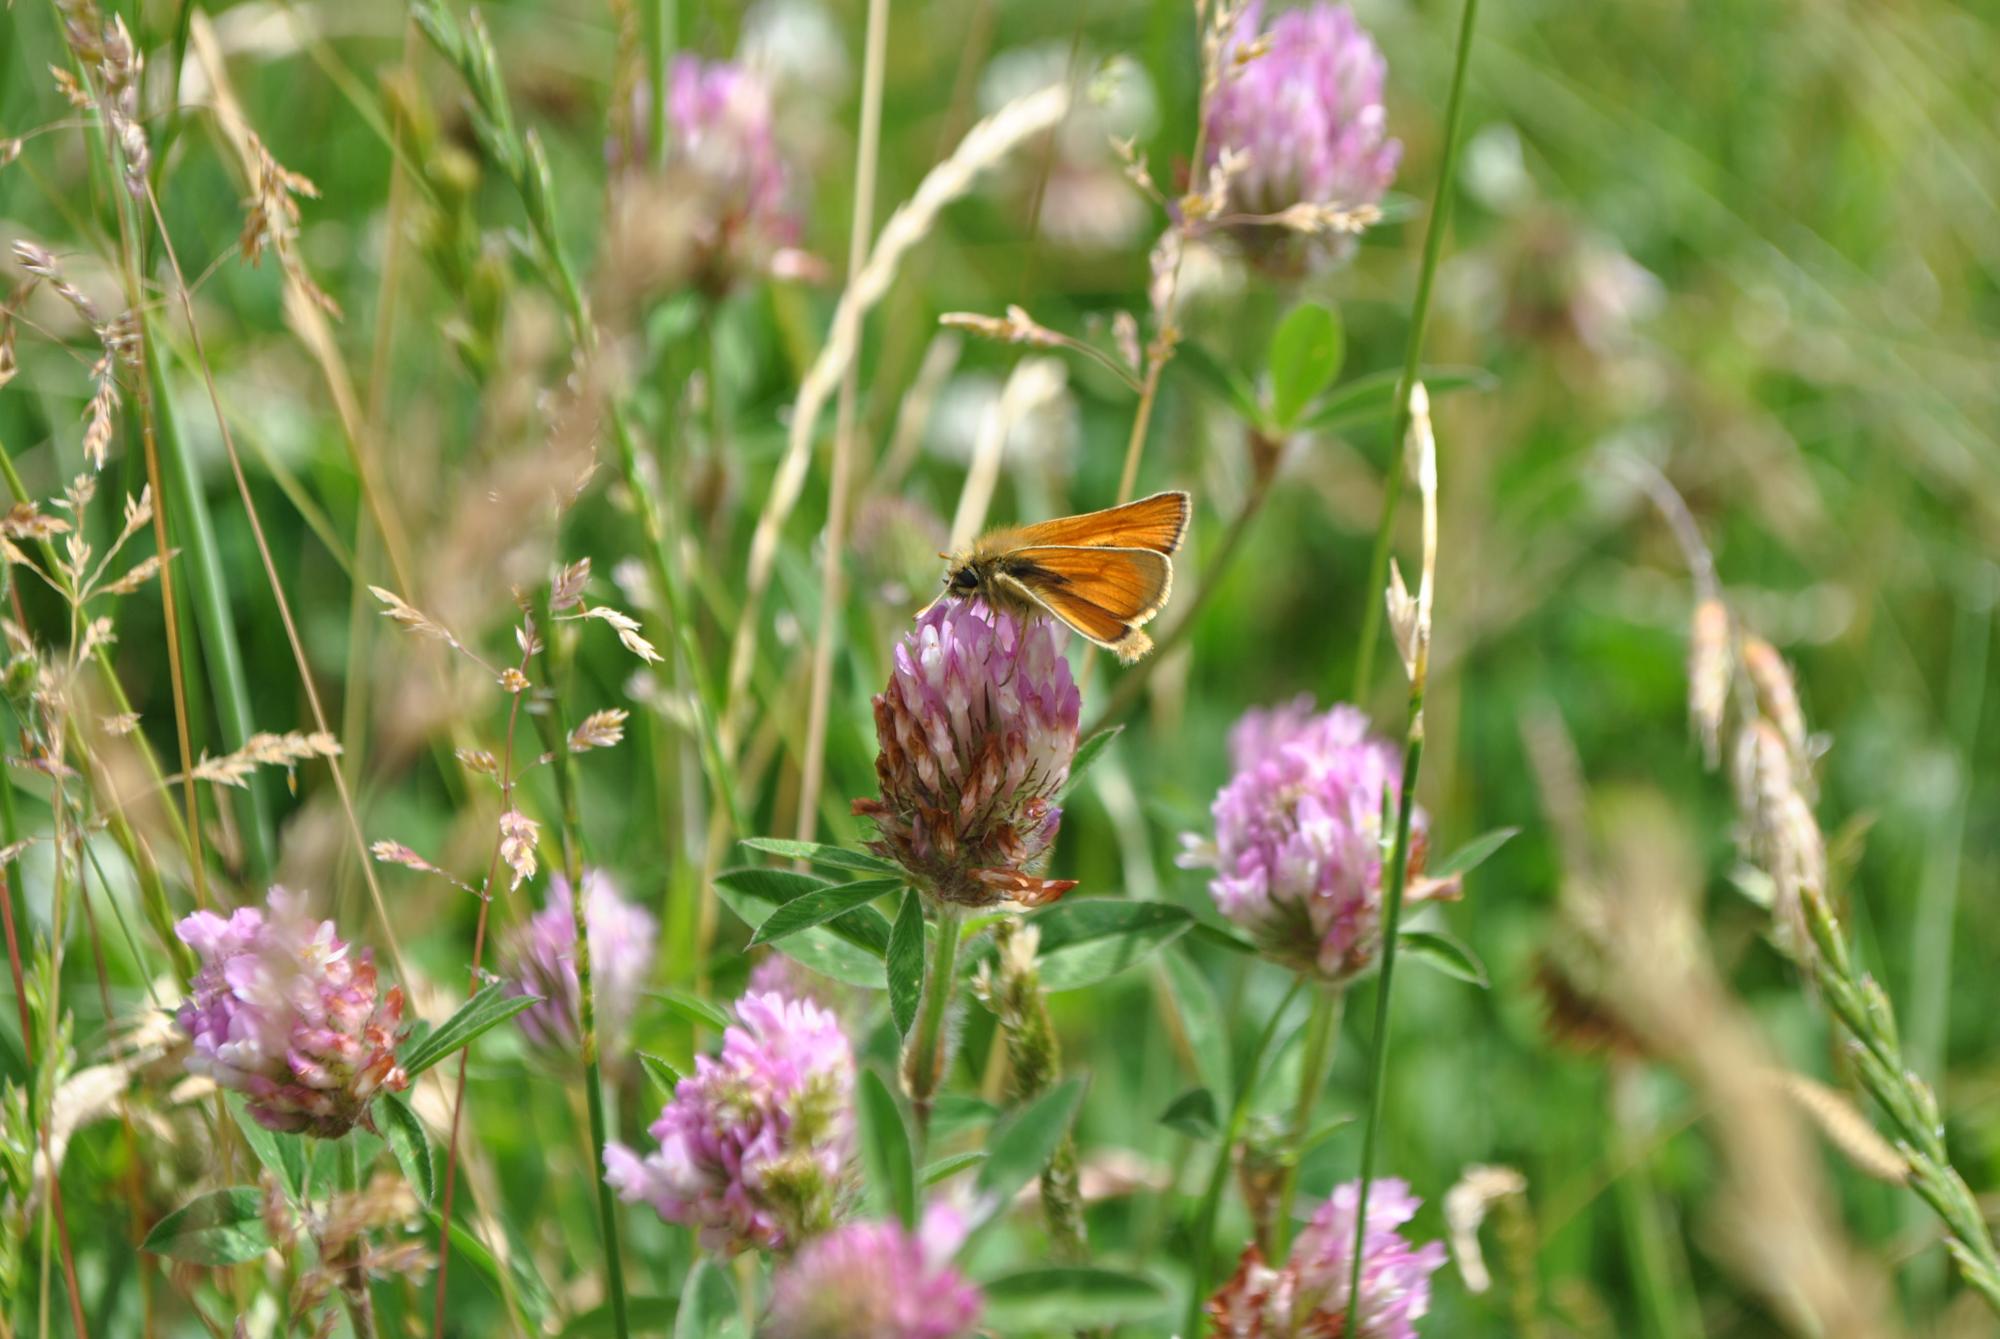 Small butterfly on wildflowers